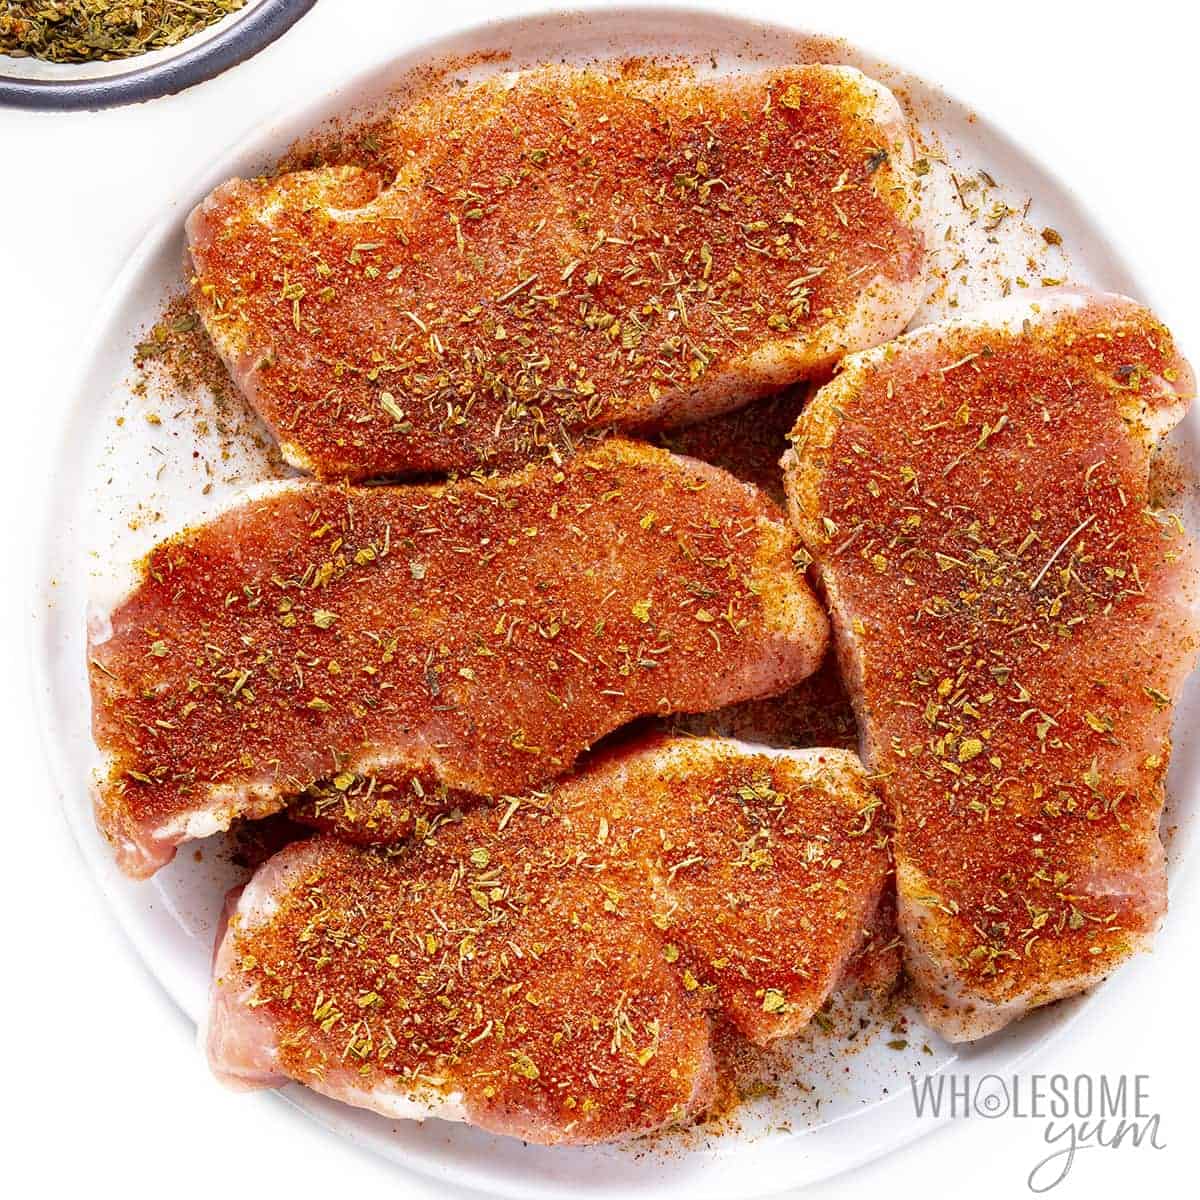 Pork chops with dry rub on a plate.